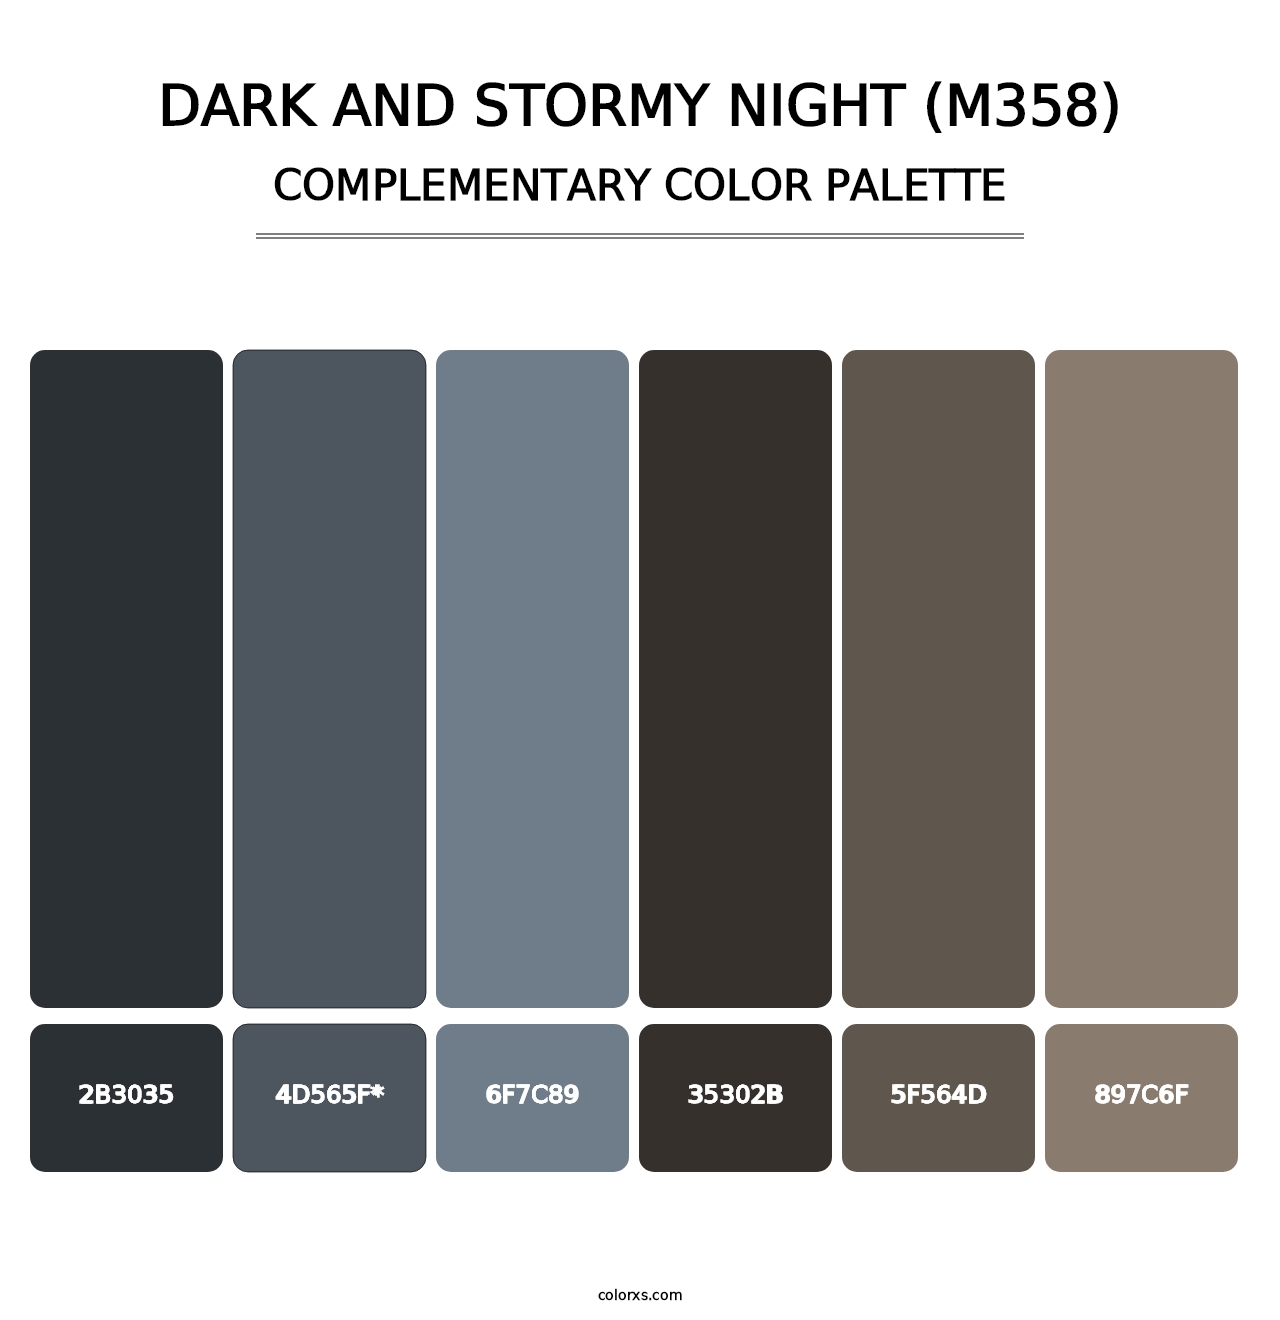 Dark and Stormy Night (M358) - Complementary Color Palette